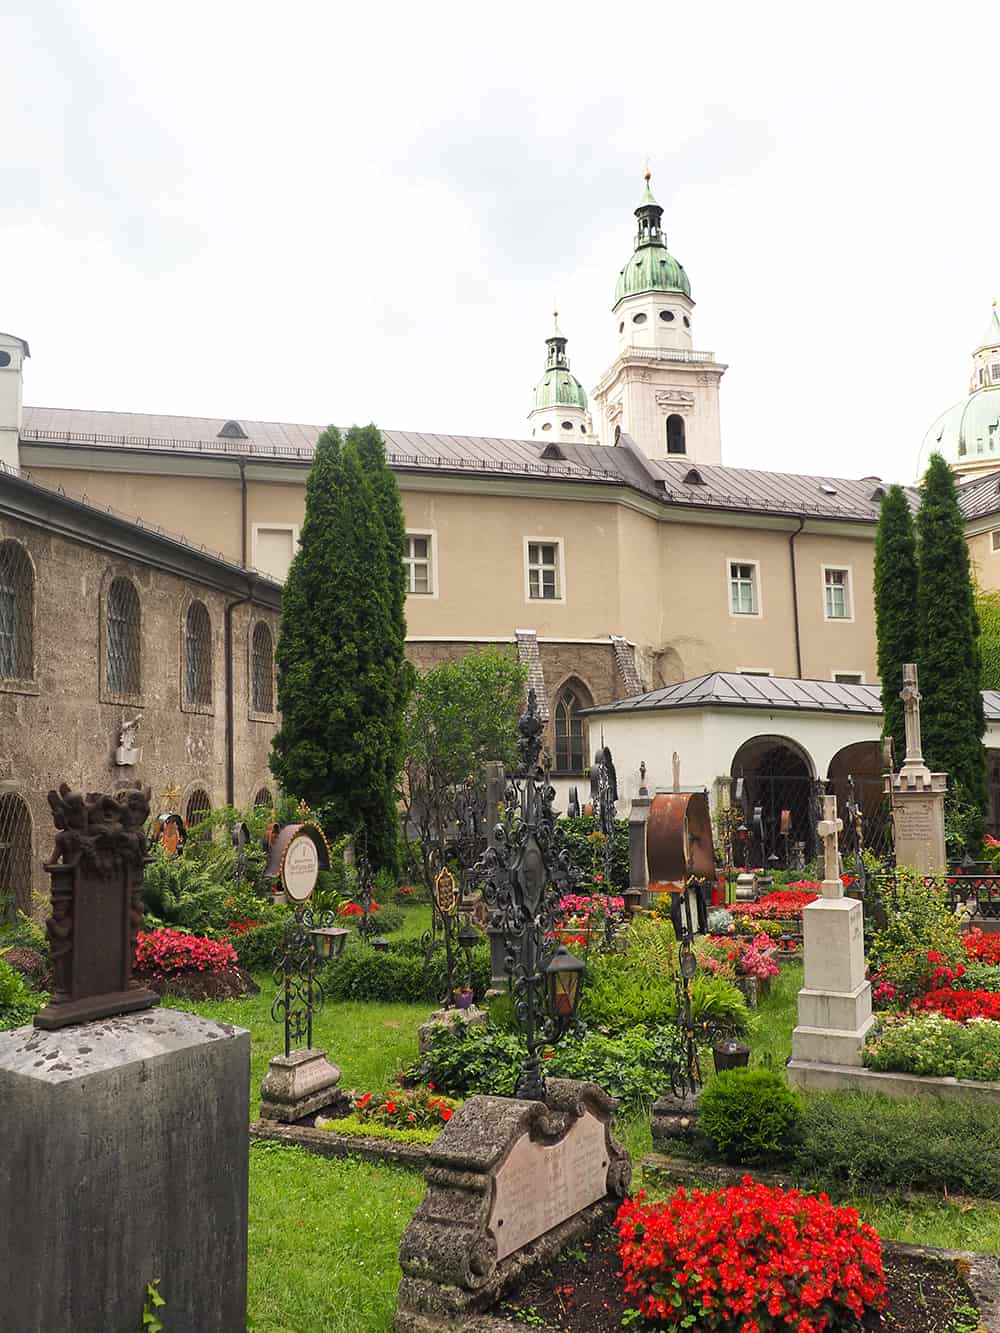 St. Peters Abbey is the oldest monastary in German speaking areas and has the oldest continuous history. Both can be visited in Salzburg, Austria. | via Autumn All Along